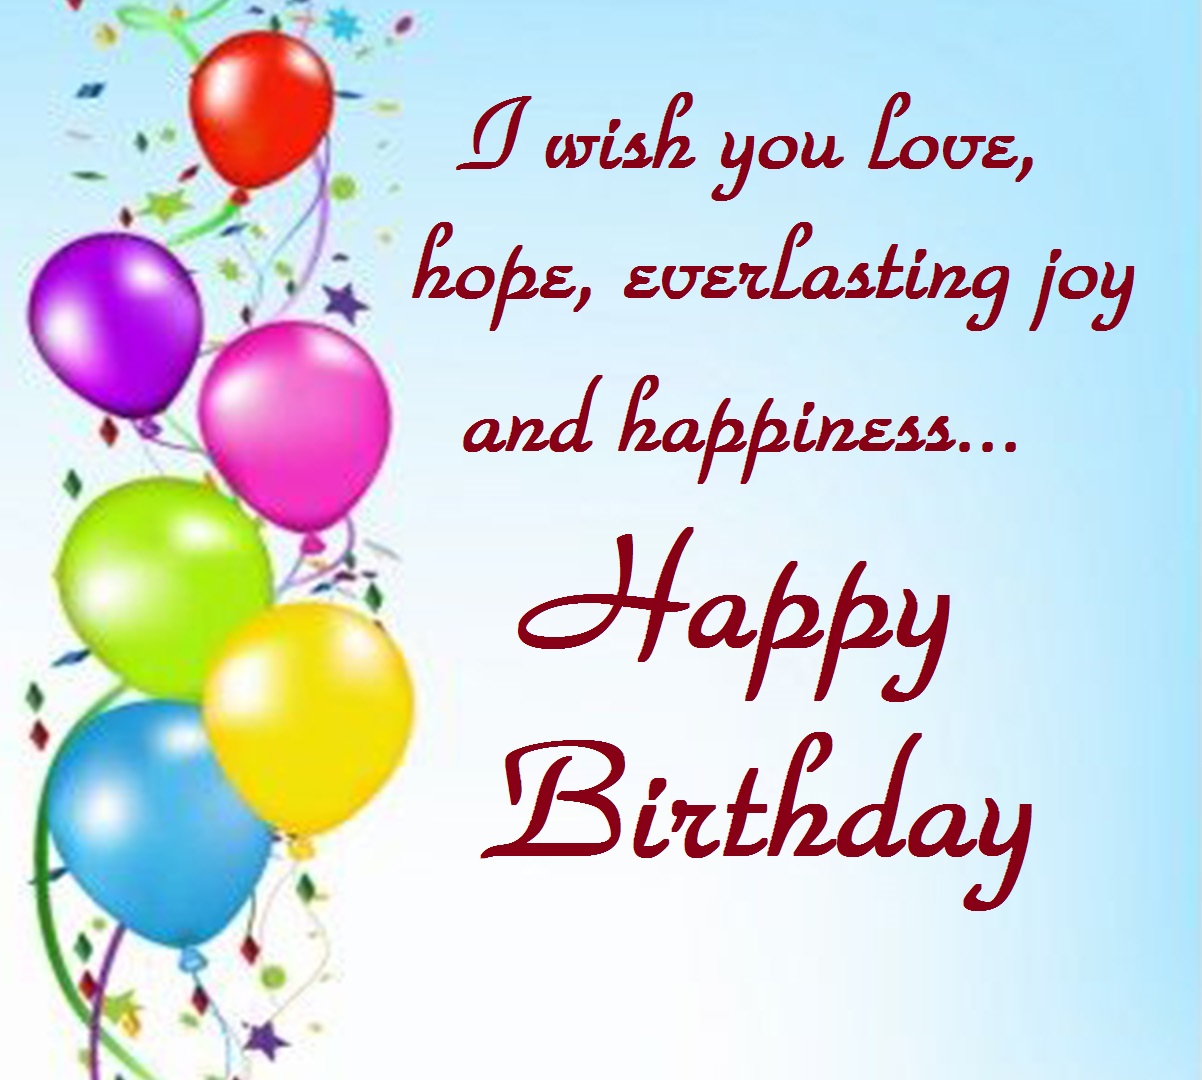 Birthday Wishes Cards 2018 Images | Happy Birthday Greetings Messages